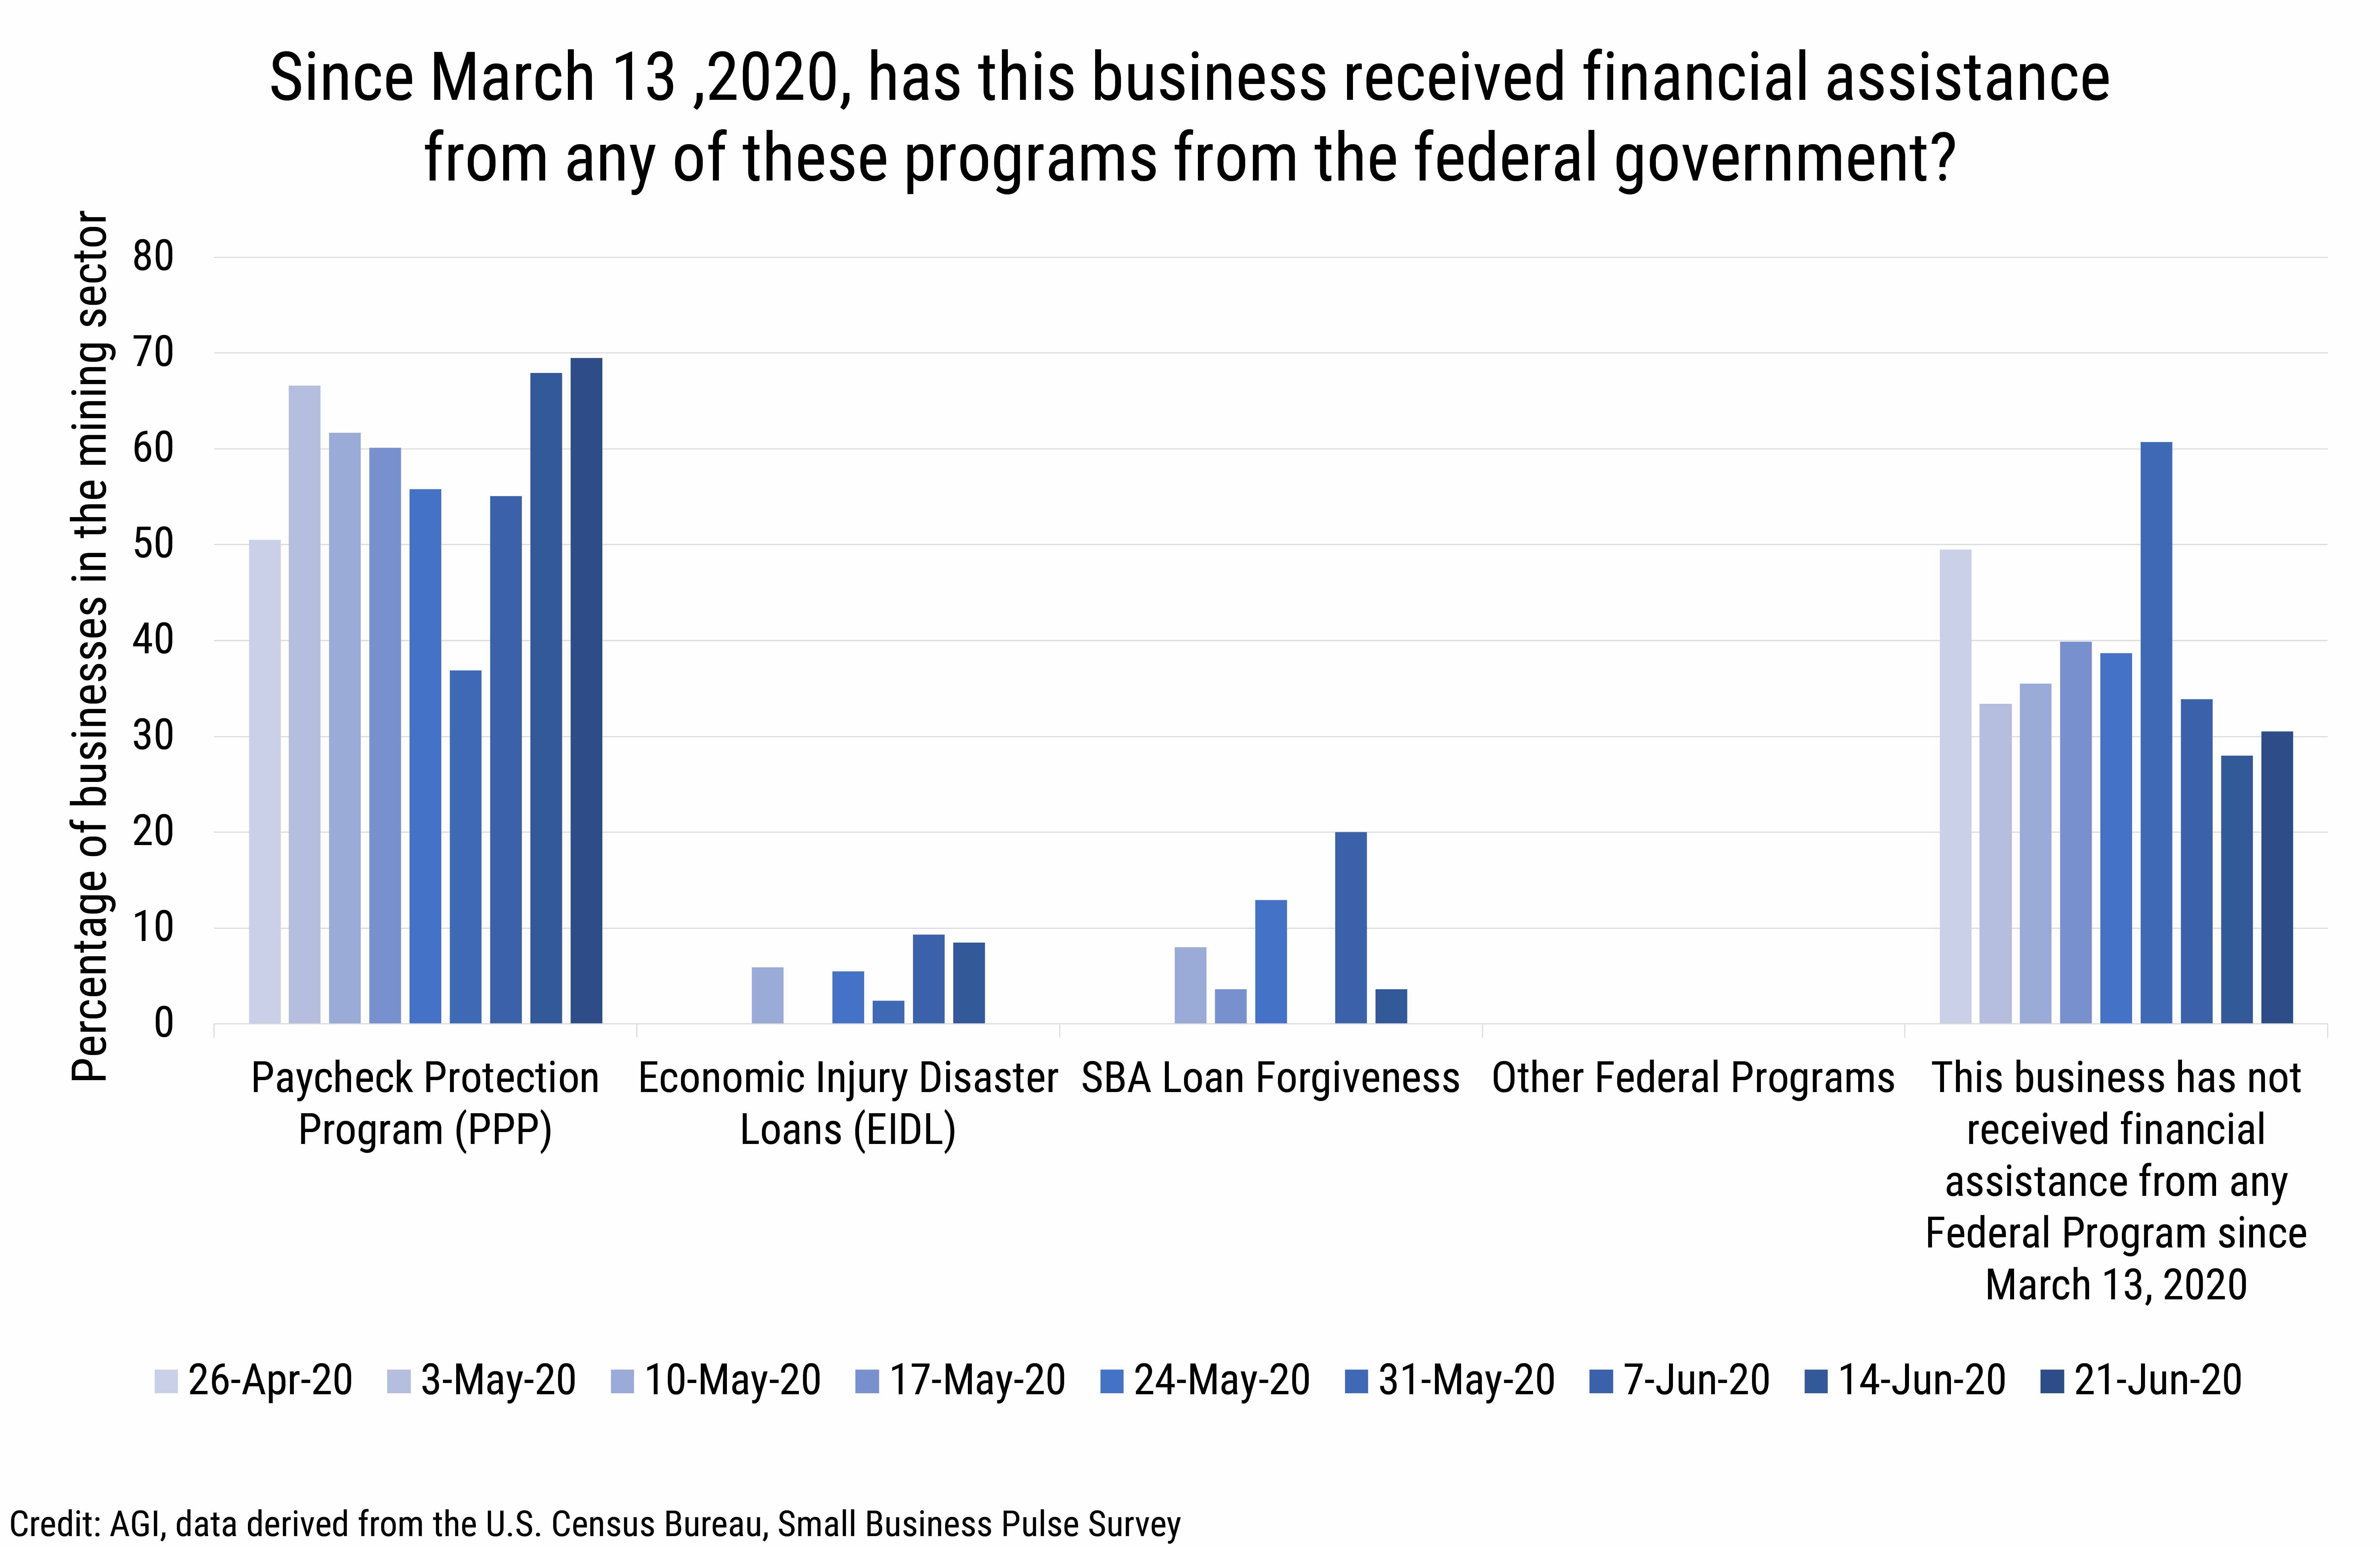 DB_2020-015_chart07 - Mining sector: Sources of receivied financial assistance (credit: AGI, data derived from the U.S. Census Bureau, Small Business Pulse Survey)